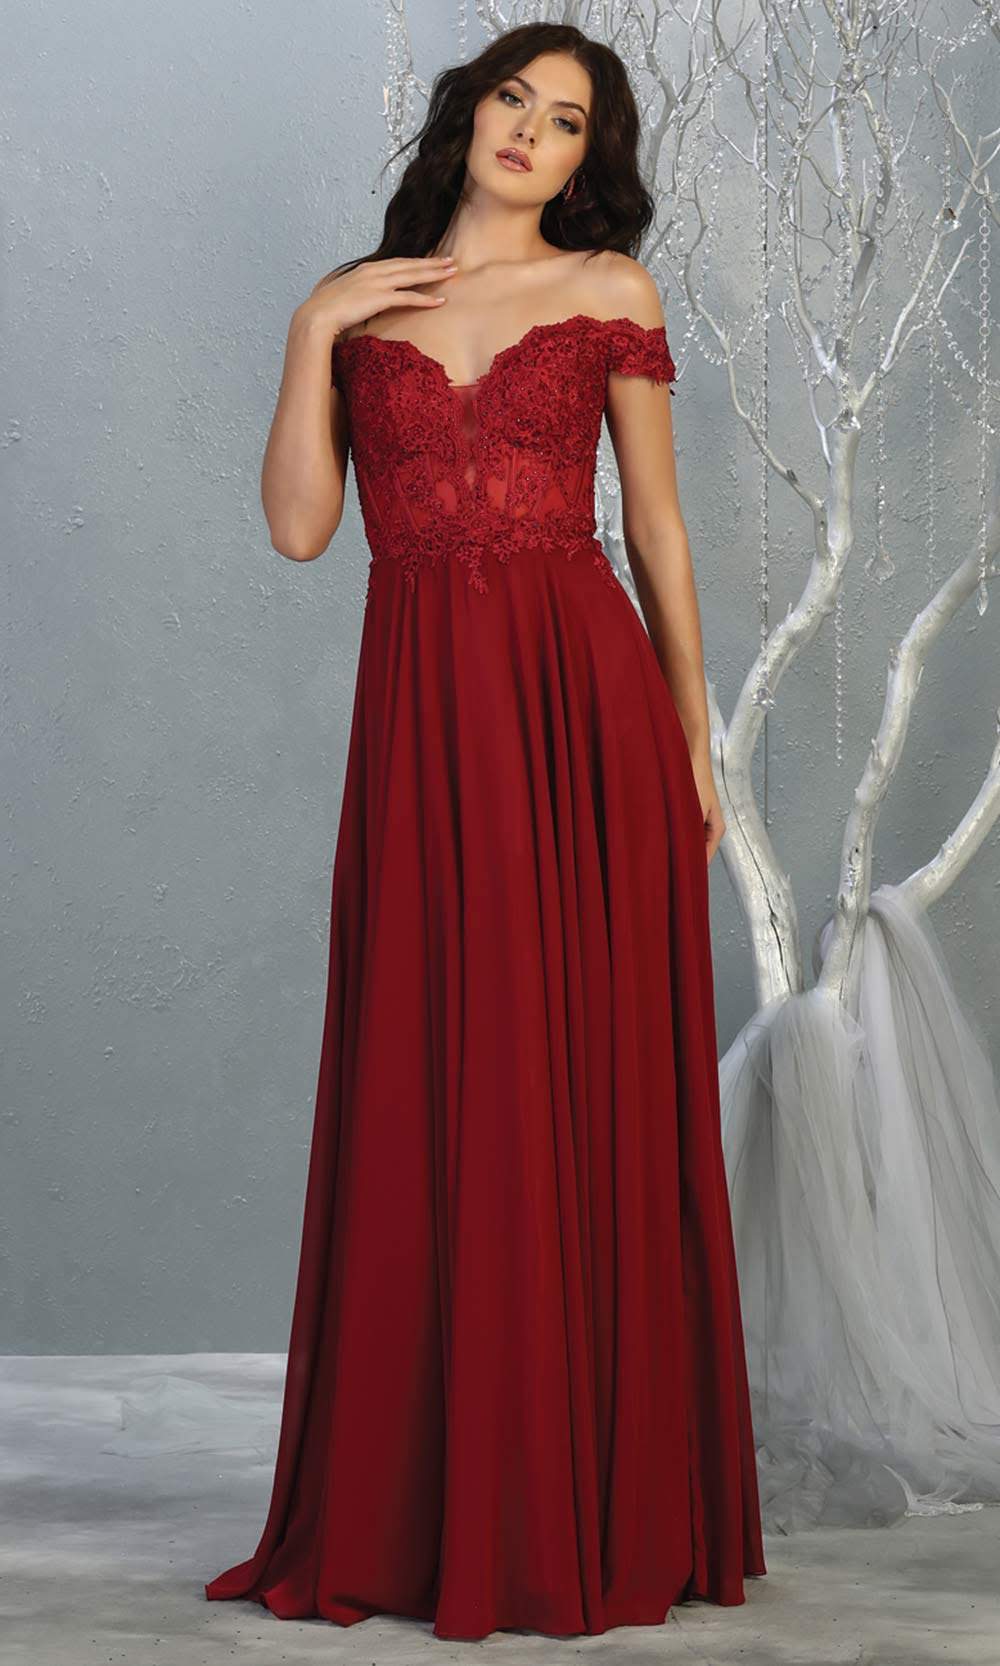 Mayqueen MQ1714 long Burgundy red flowy dress features an off shoulder lace neckline top with a chiffon flowy skirt. Perfect for bridesmaid dresses, simple prom dress, formal wedding guest dress,indowestern party dress,black tie party.Plus sizes avail.jpg